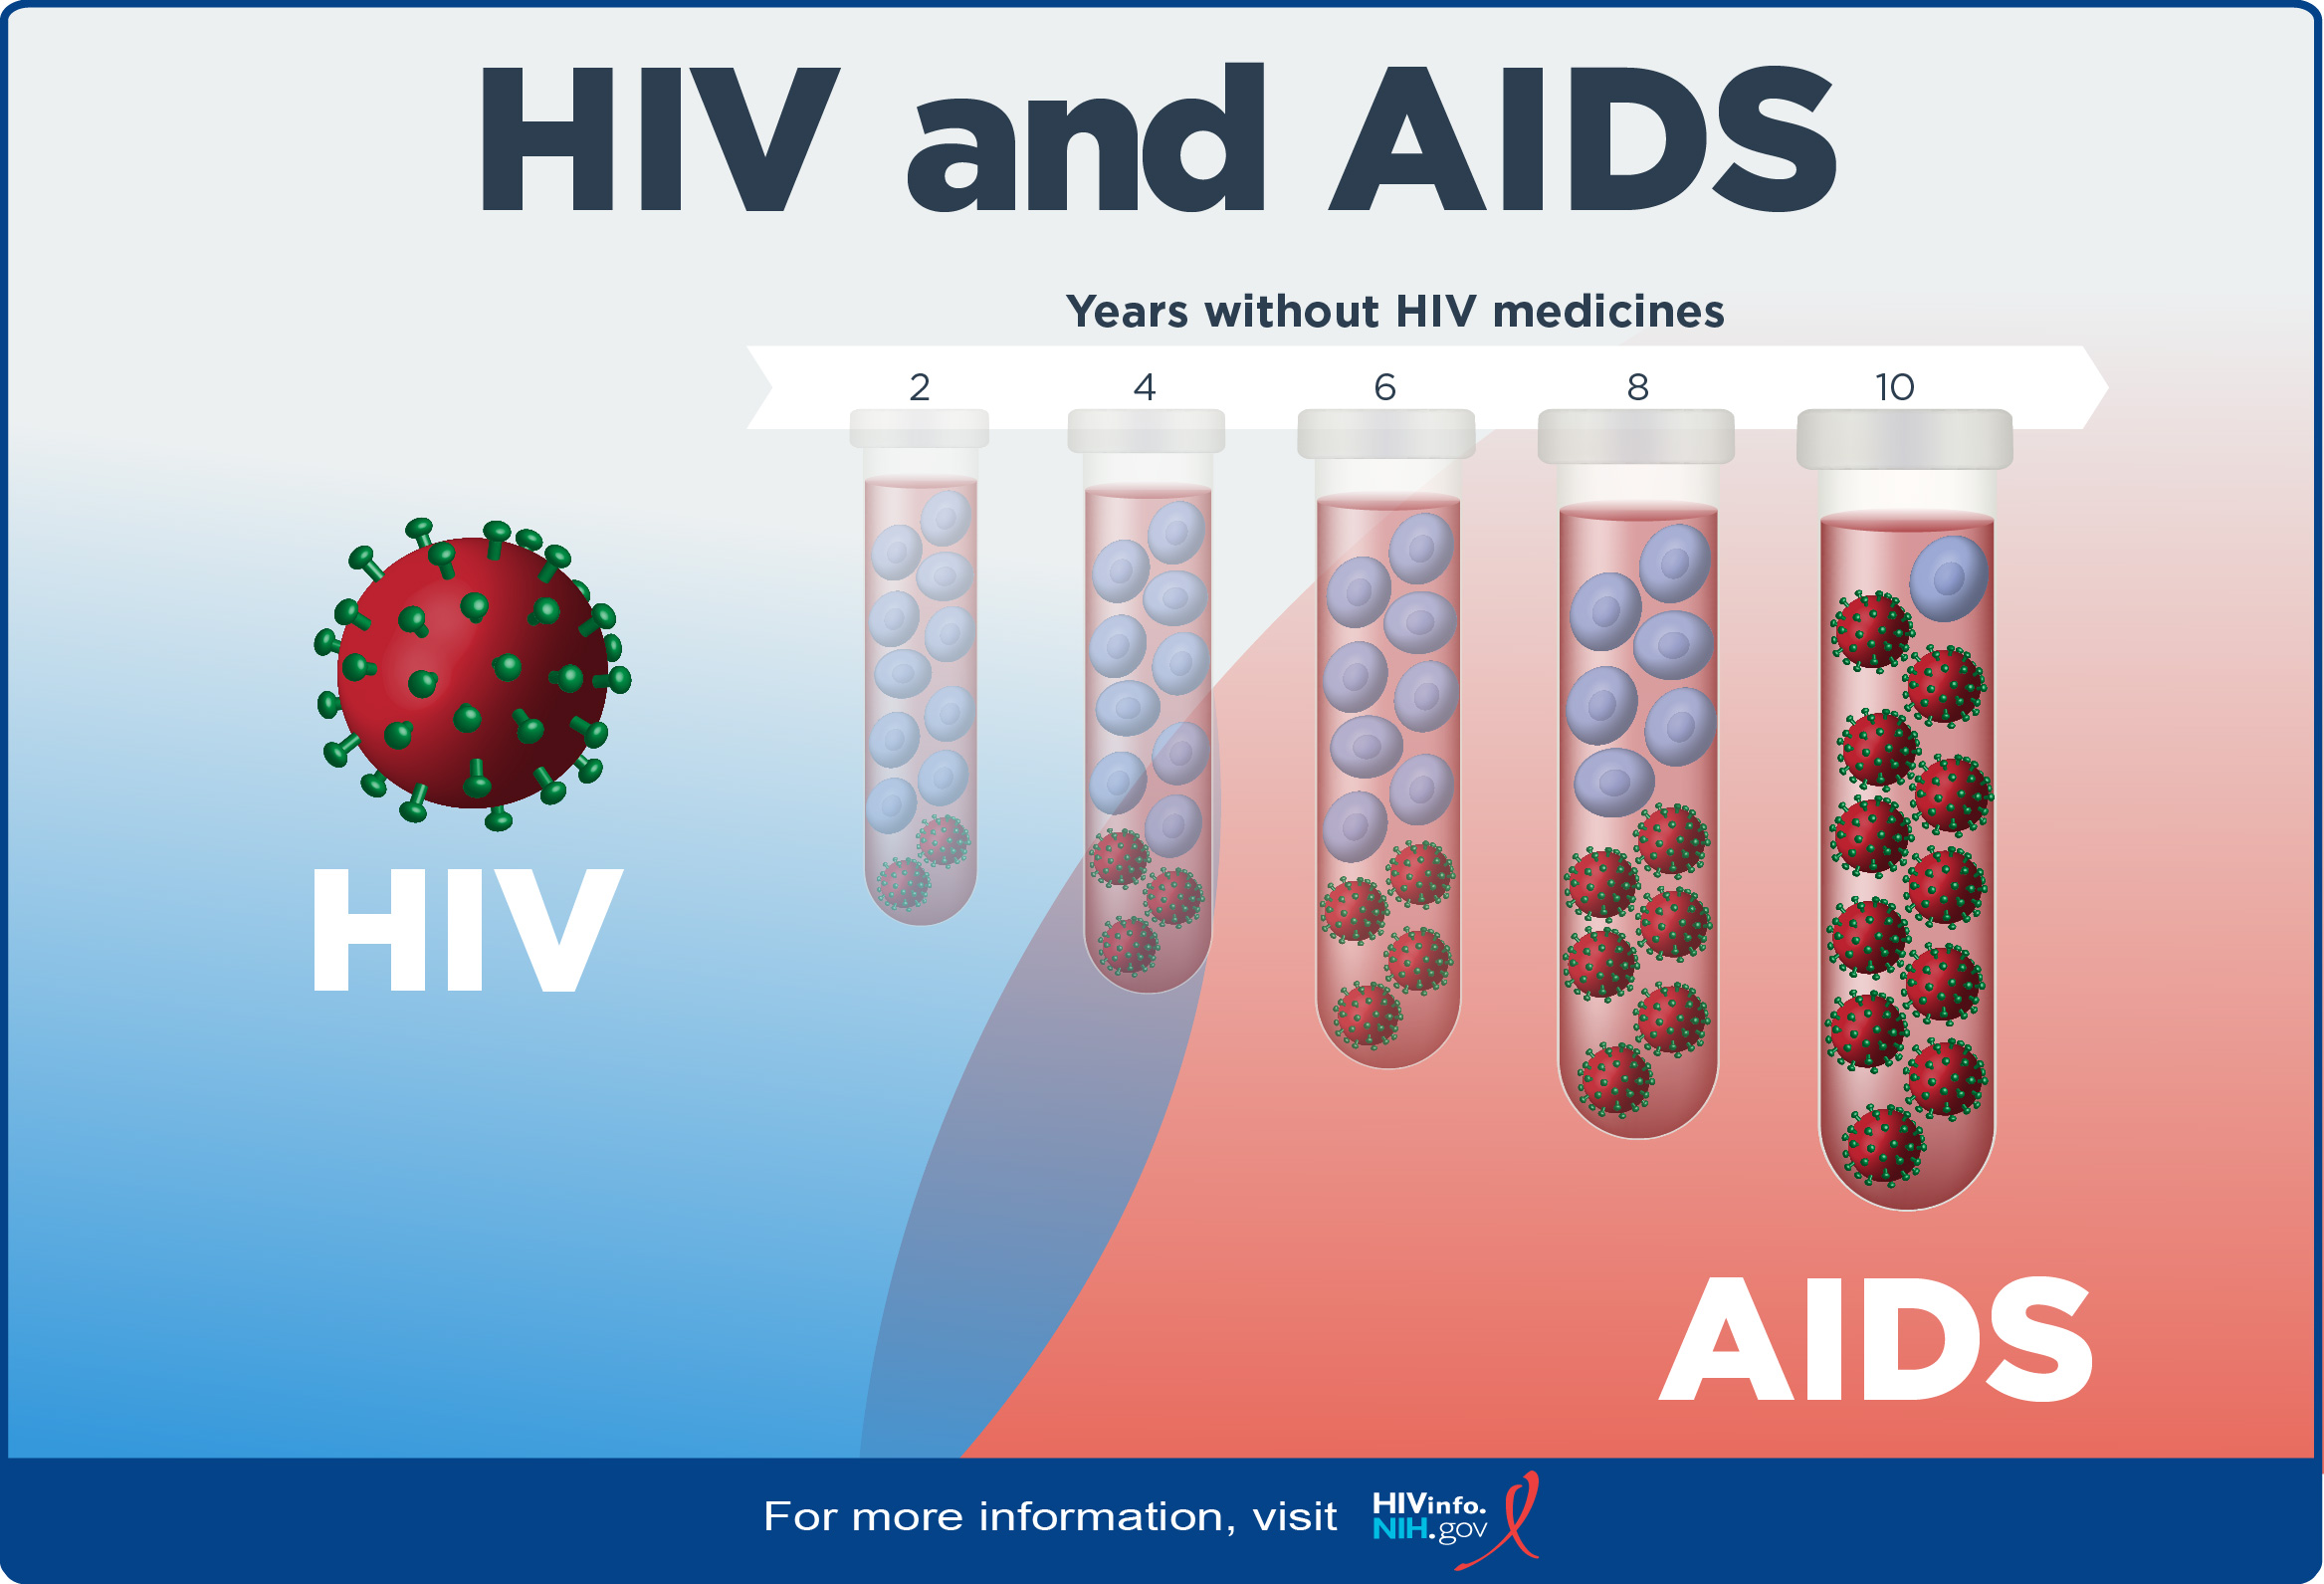 HIV and AIDS: Symptoms, Causes, Treatments – Everything You Need To Know About HIV and AIDS